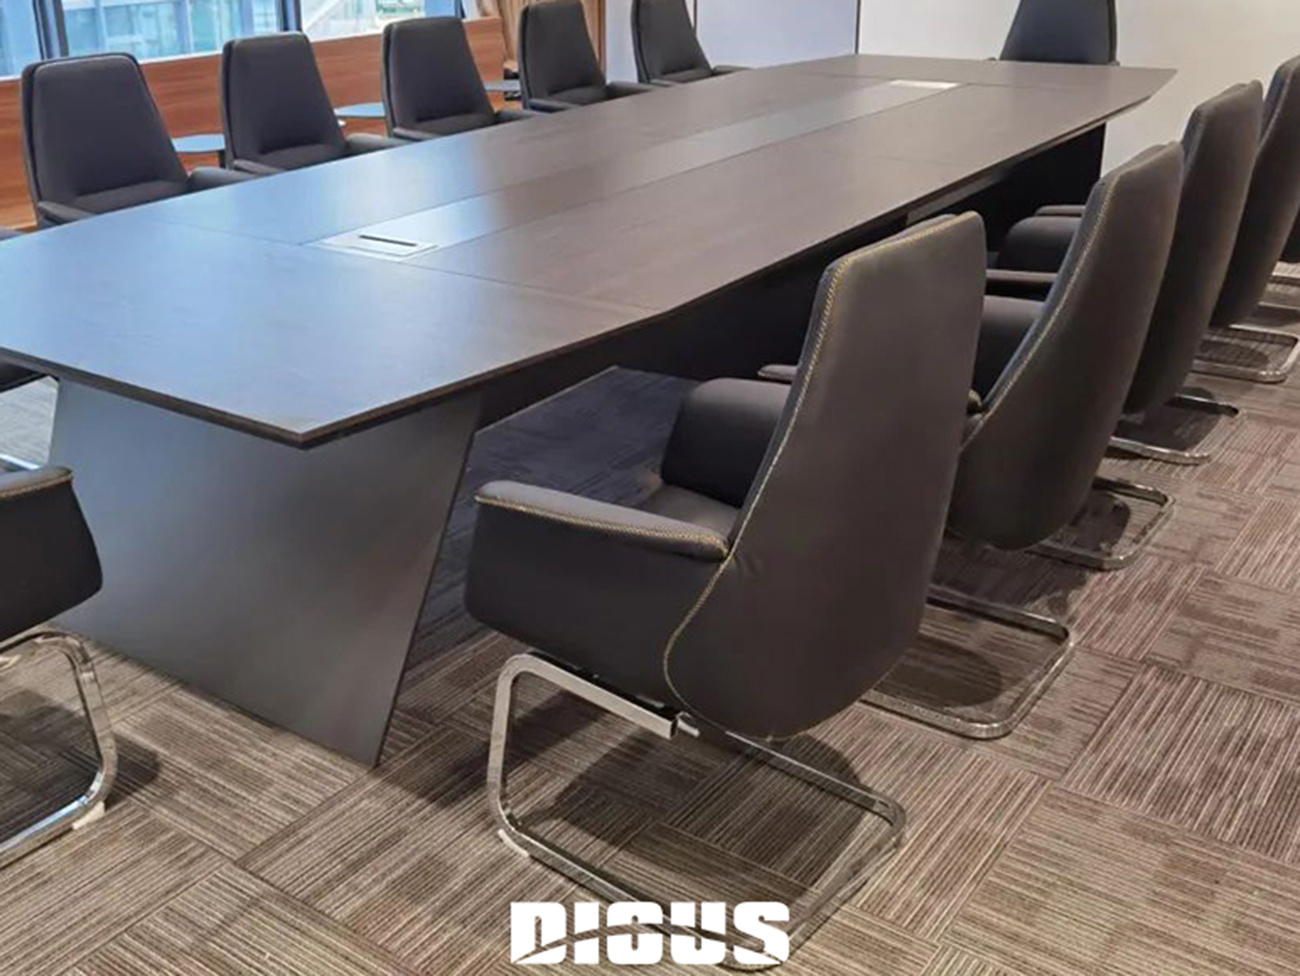 dious project - Business conference room